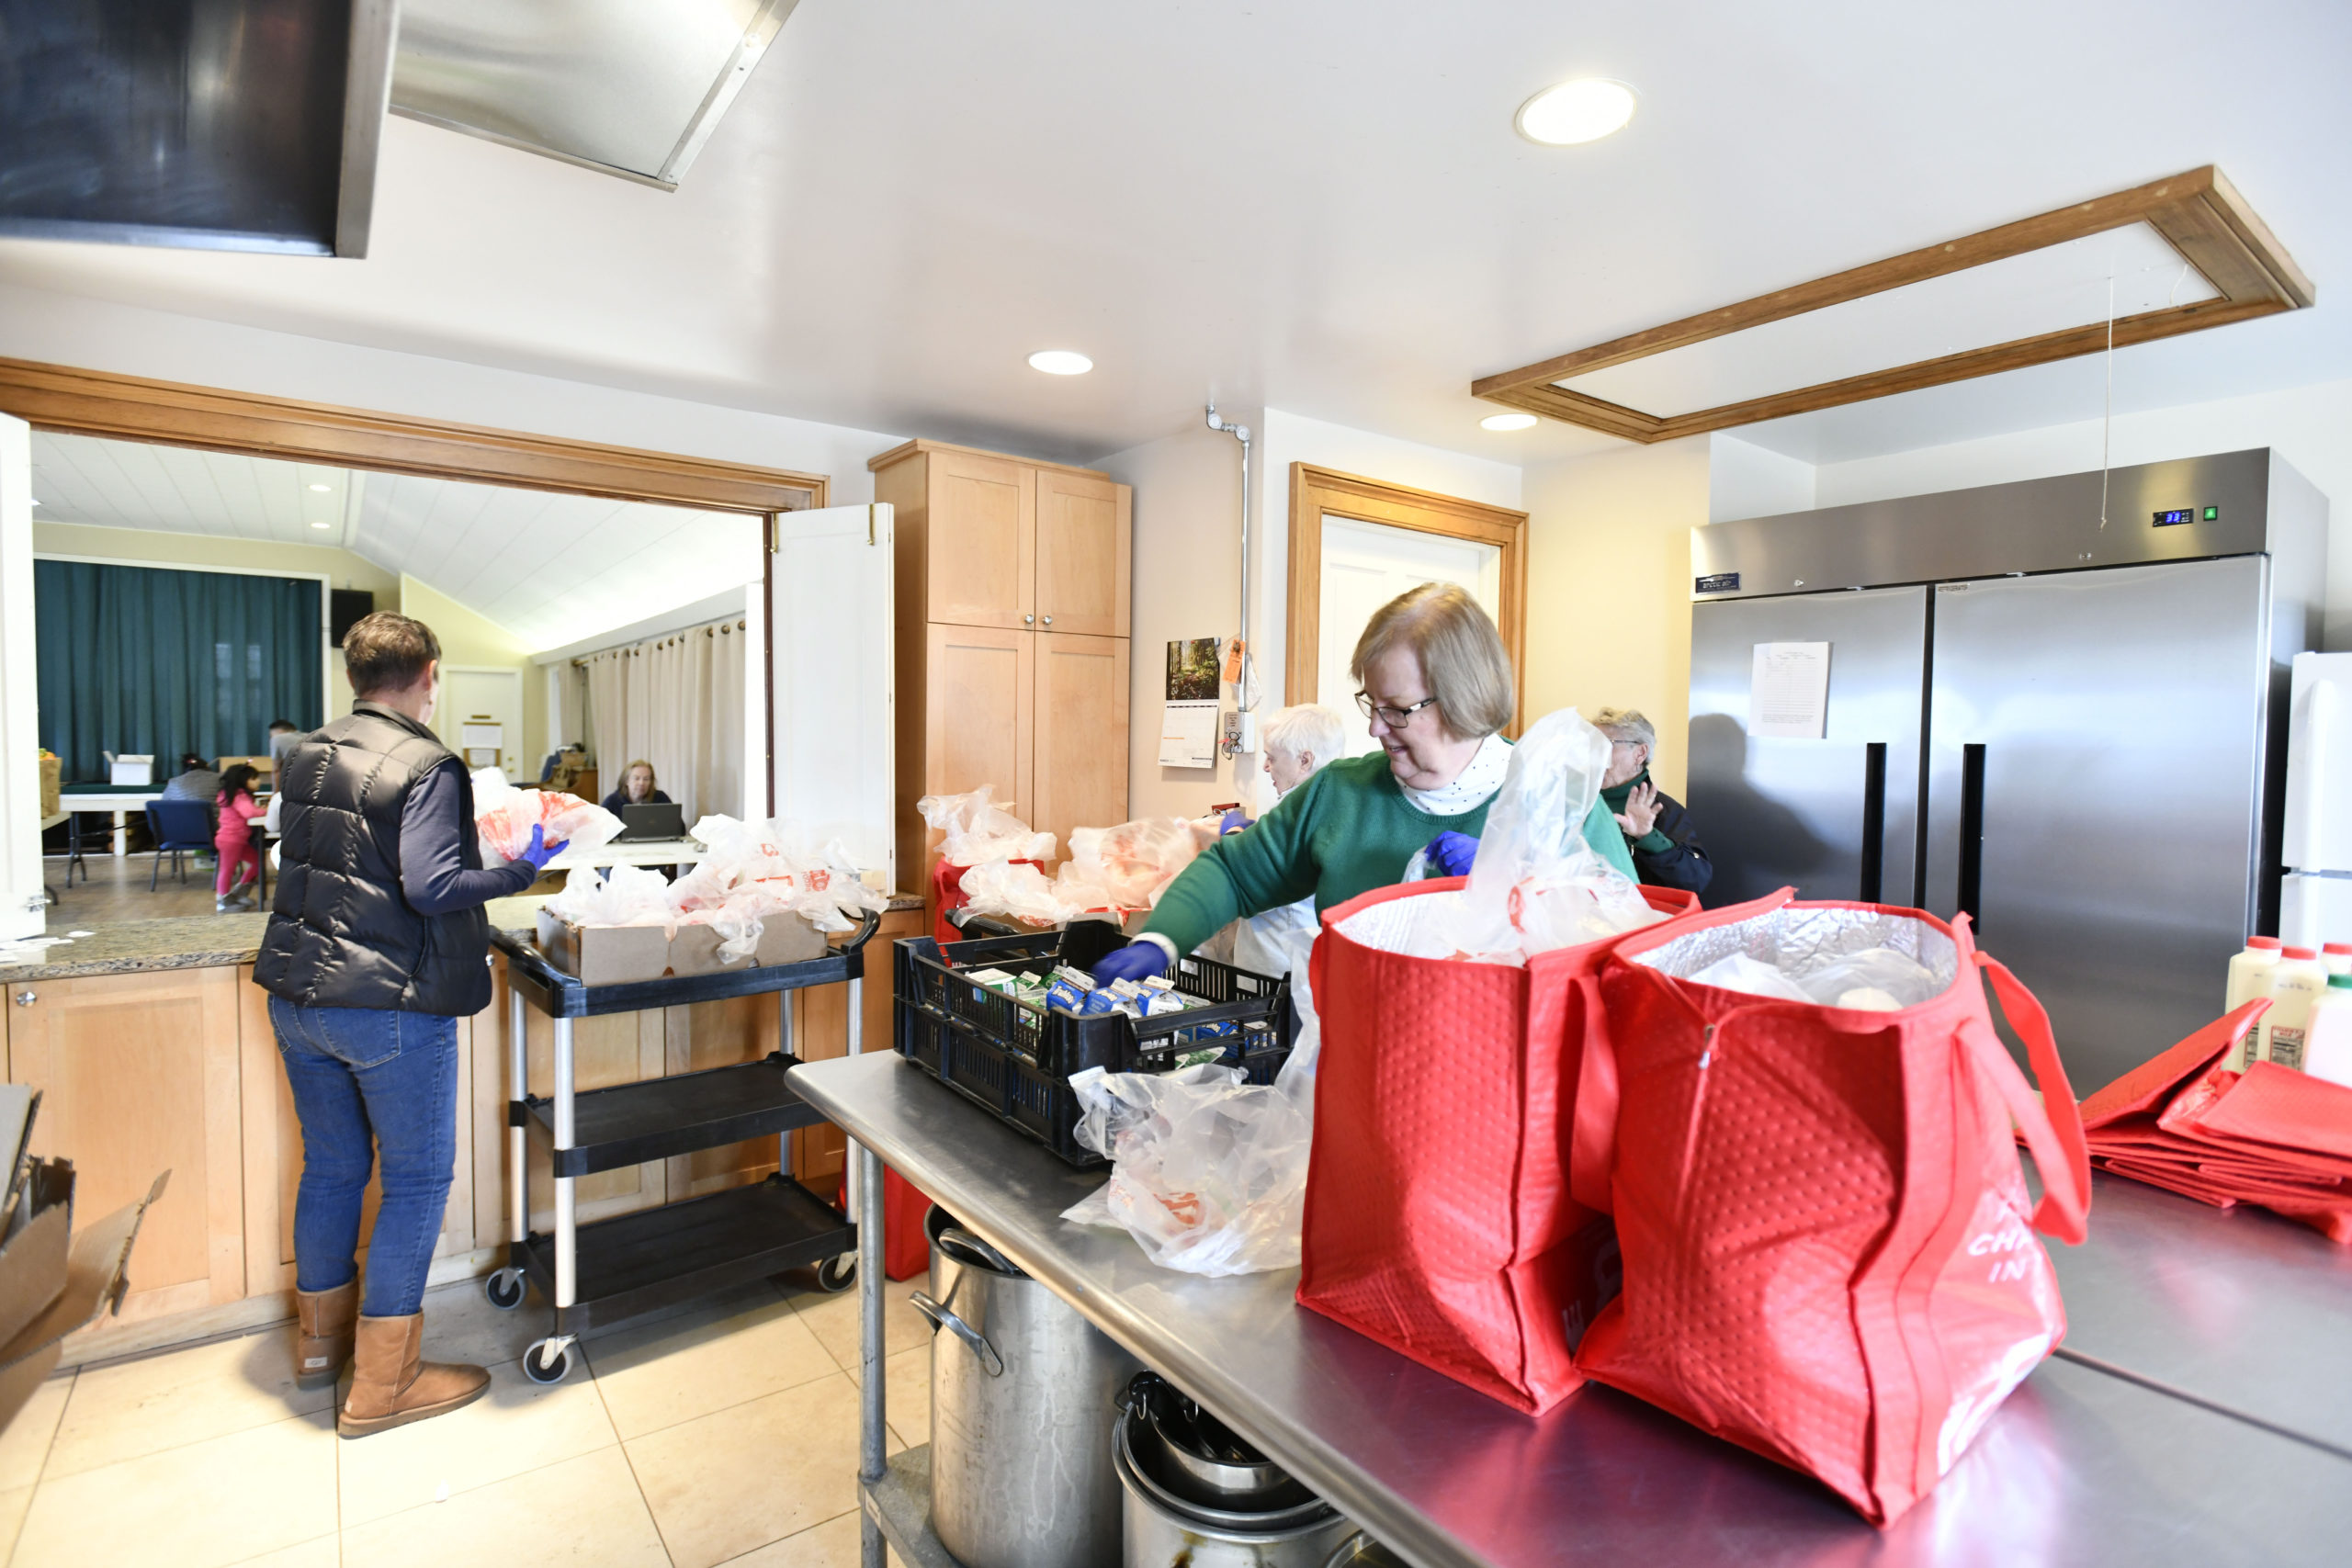 Linda Maconochie, Holly Wheaton and Deanna Tikkanen pack and distribute bags of food at the Springs Food Panrty on Wednesday, March 18.  DANA SHAW